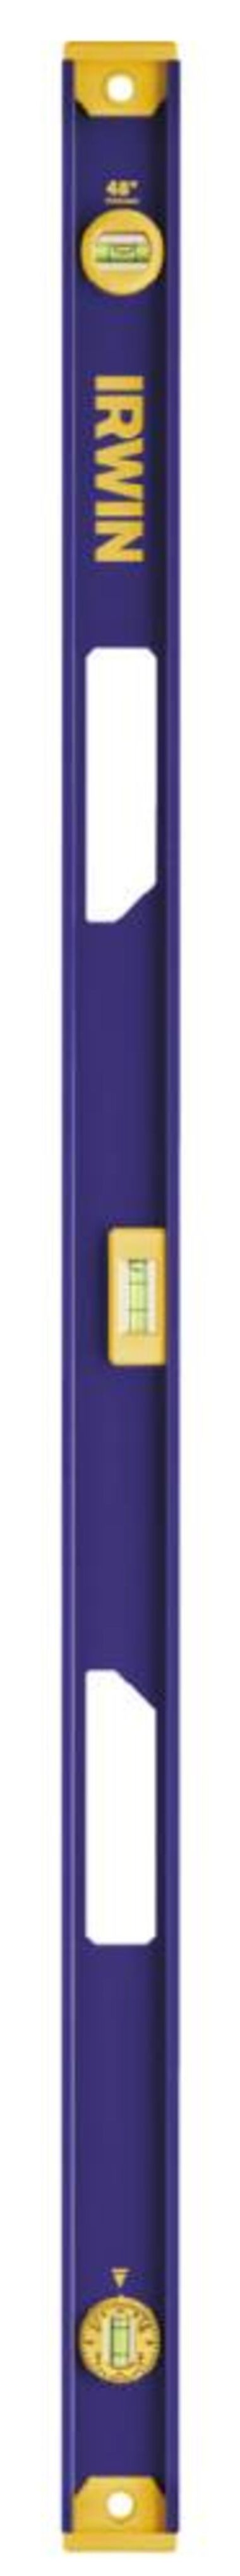 Irwin 48 In. 1050 Magnetic I-Beam Level, large image number 0